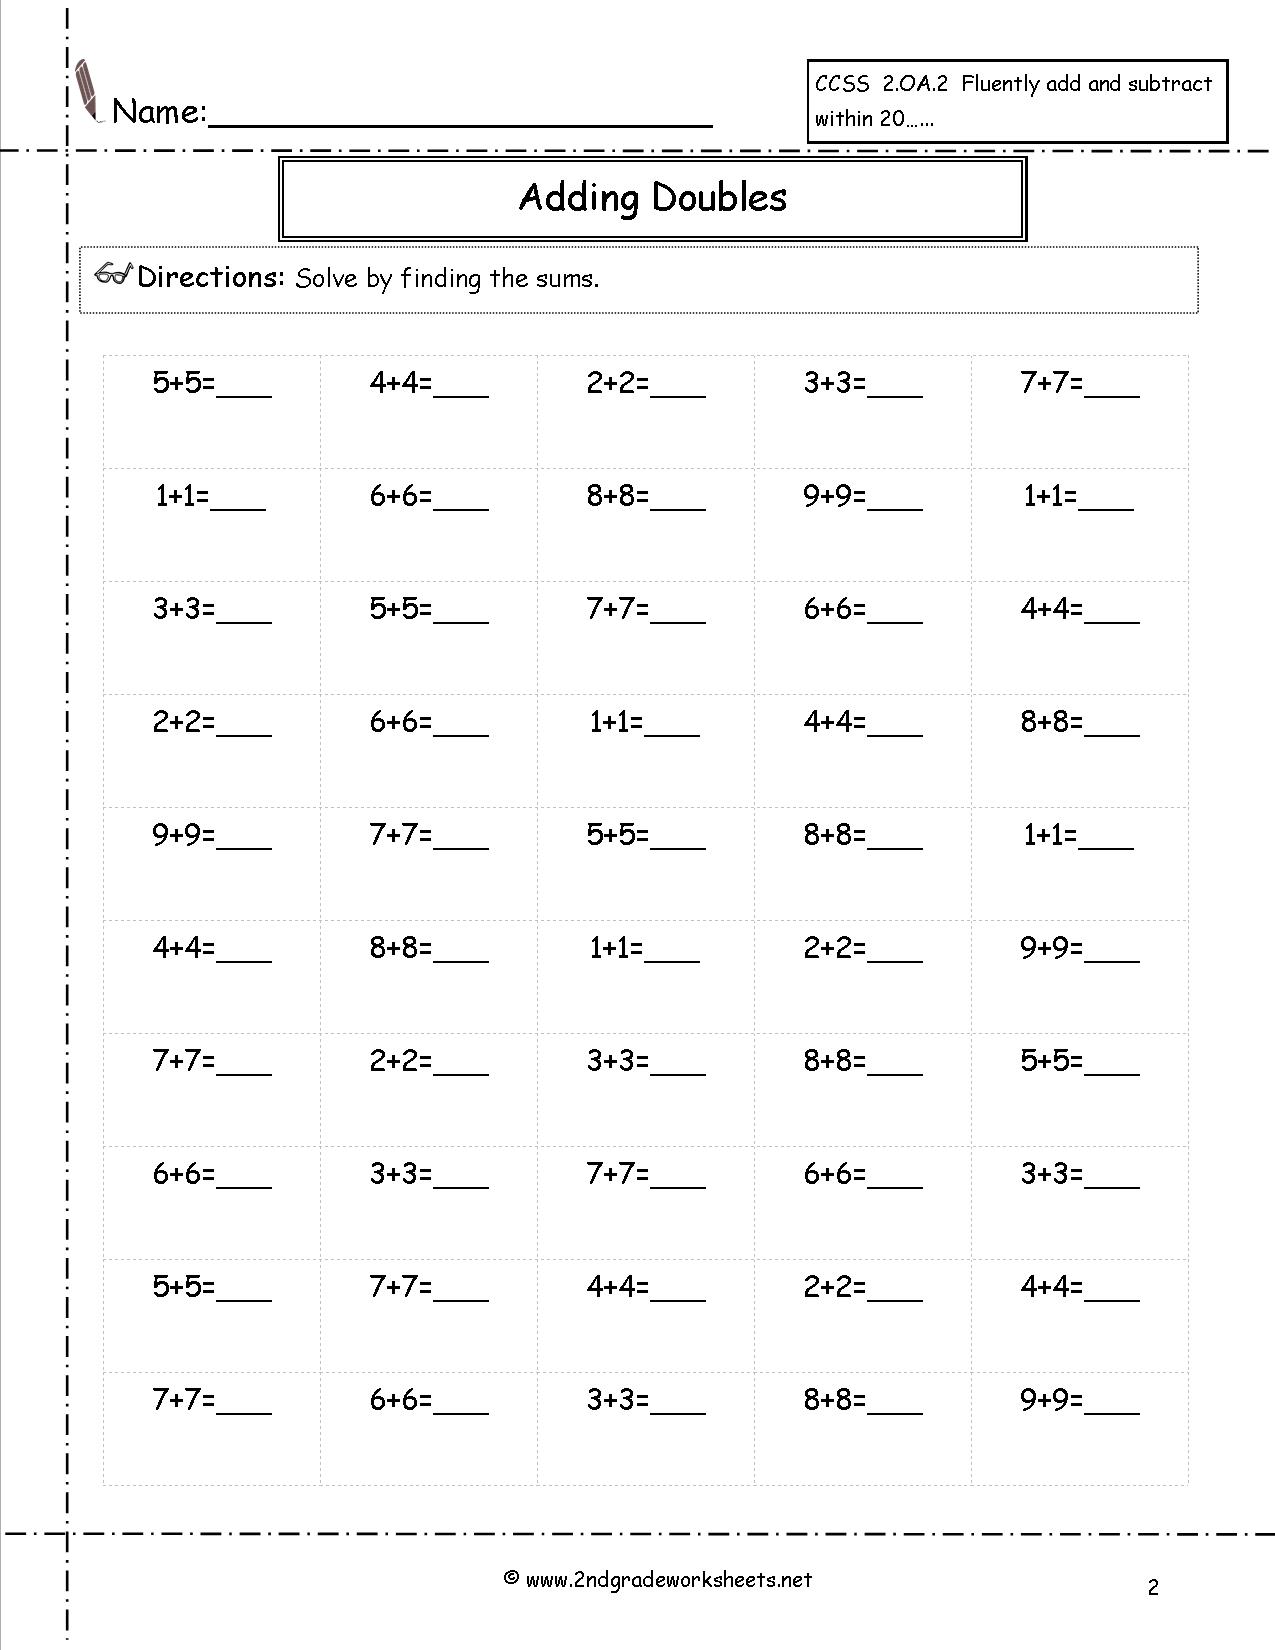 5-best-images-of-common-base-equations-worksheets-math-addition-worksheets-2nd-grade-graphing